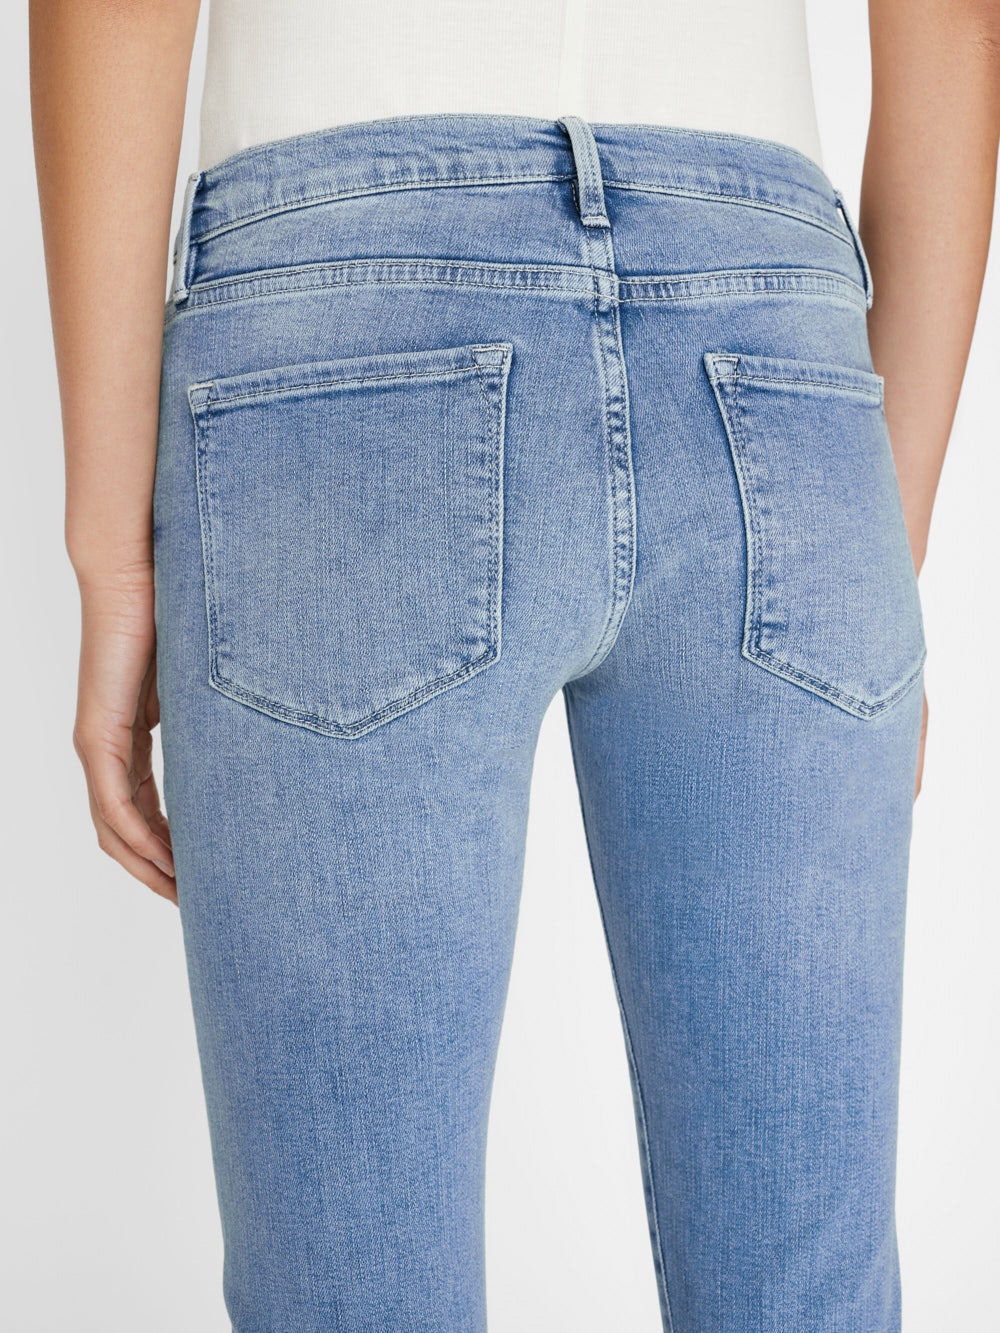 The sustainable and comfortable back view of a woman in Frame's Le Garcon - Galeston boyfriend jeans.